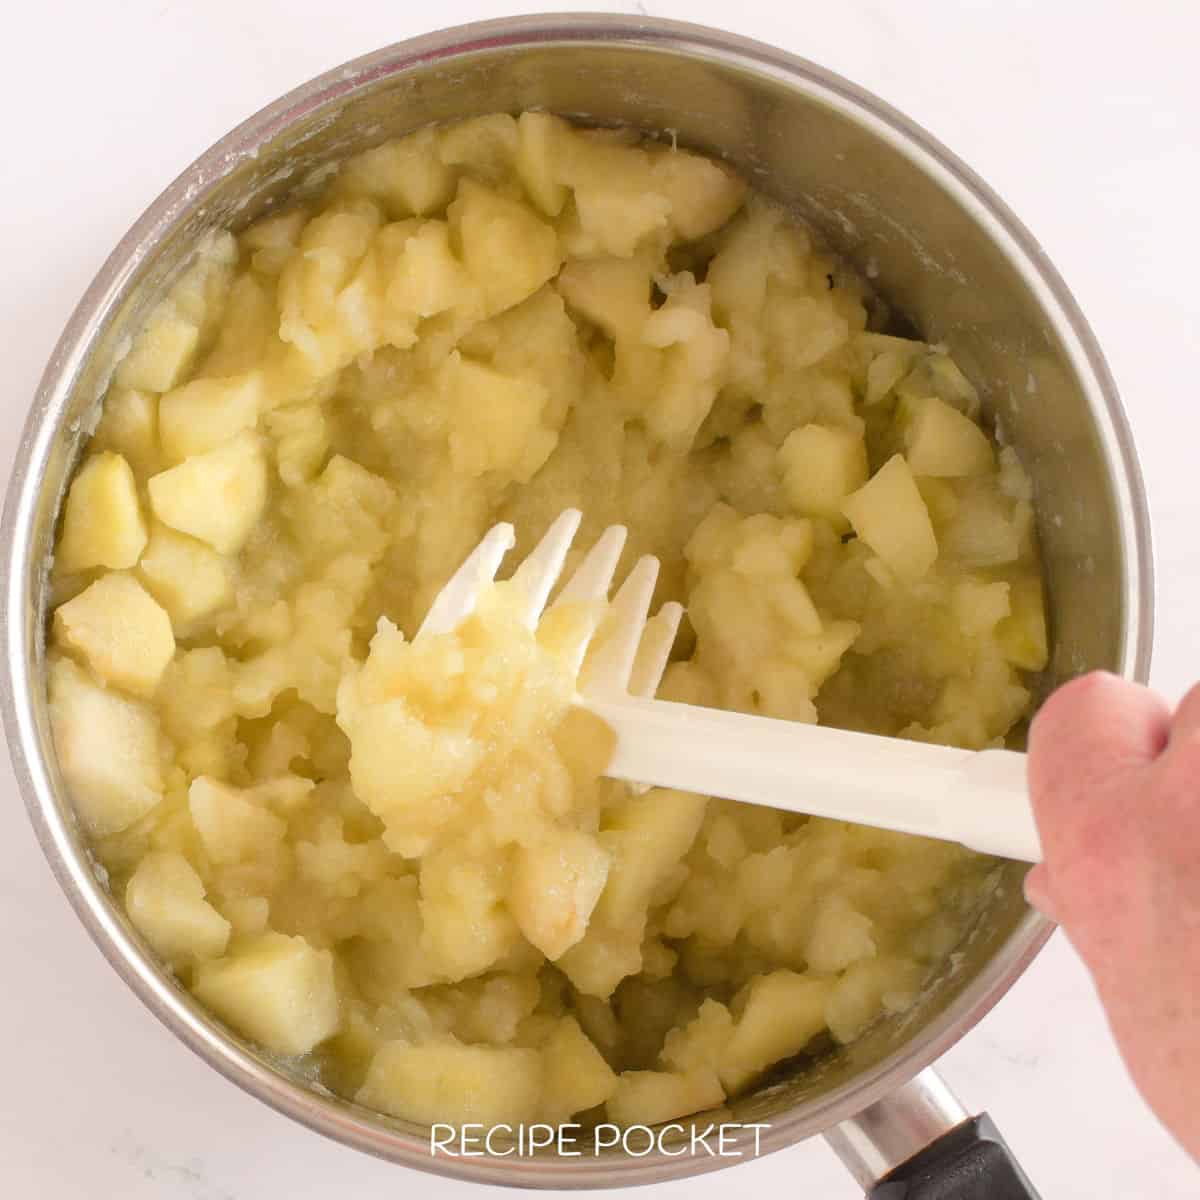 Cooked apples being mashed in a saucepan.